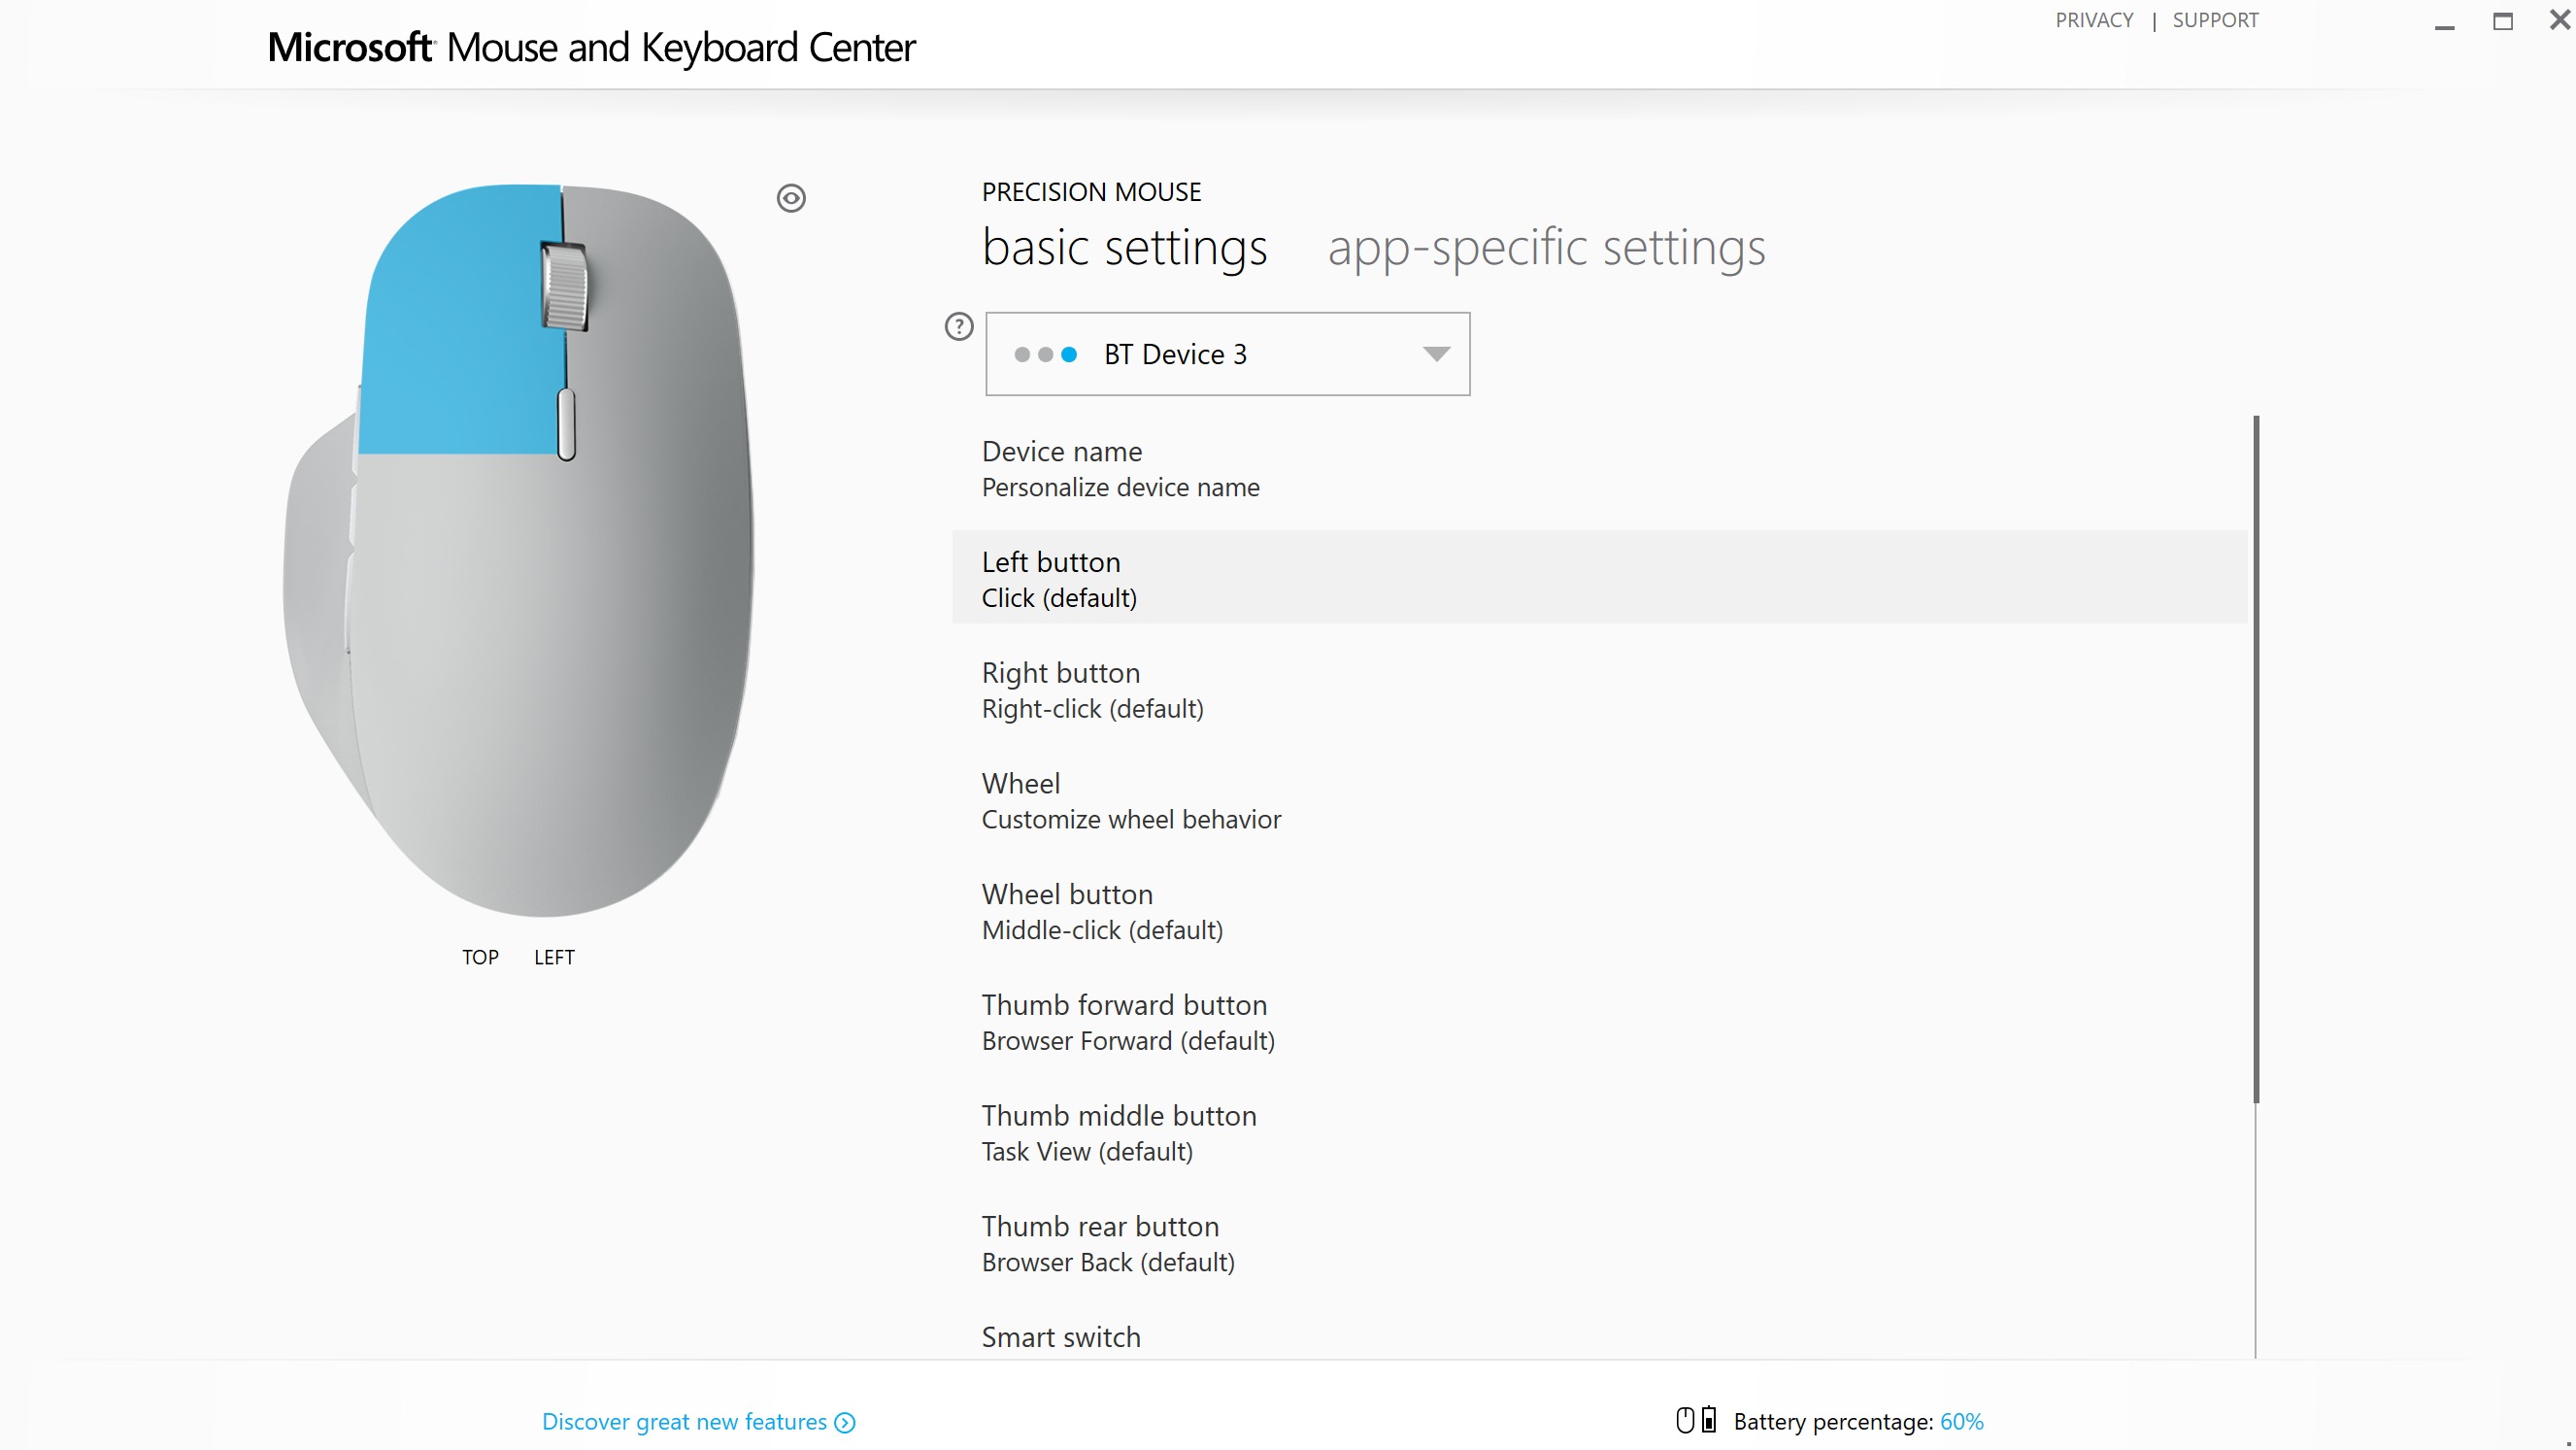 Microsoft mouse and keyboard center download software